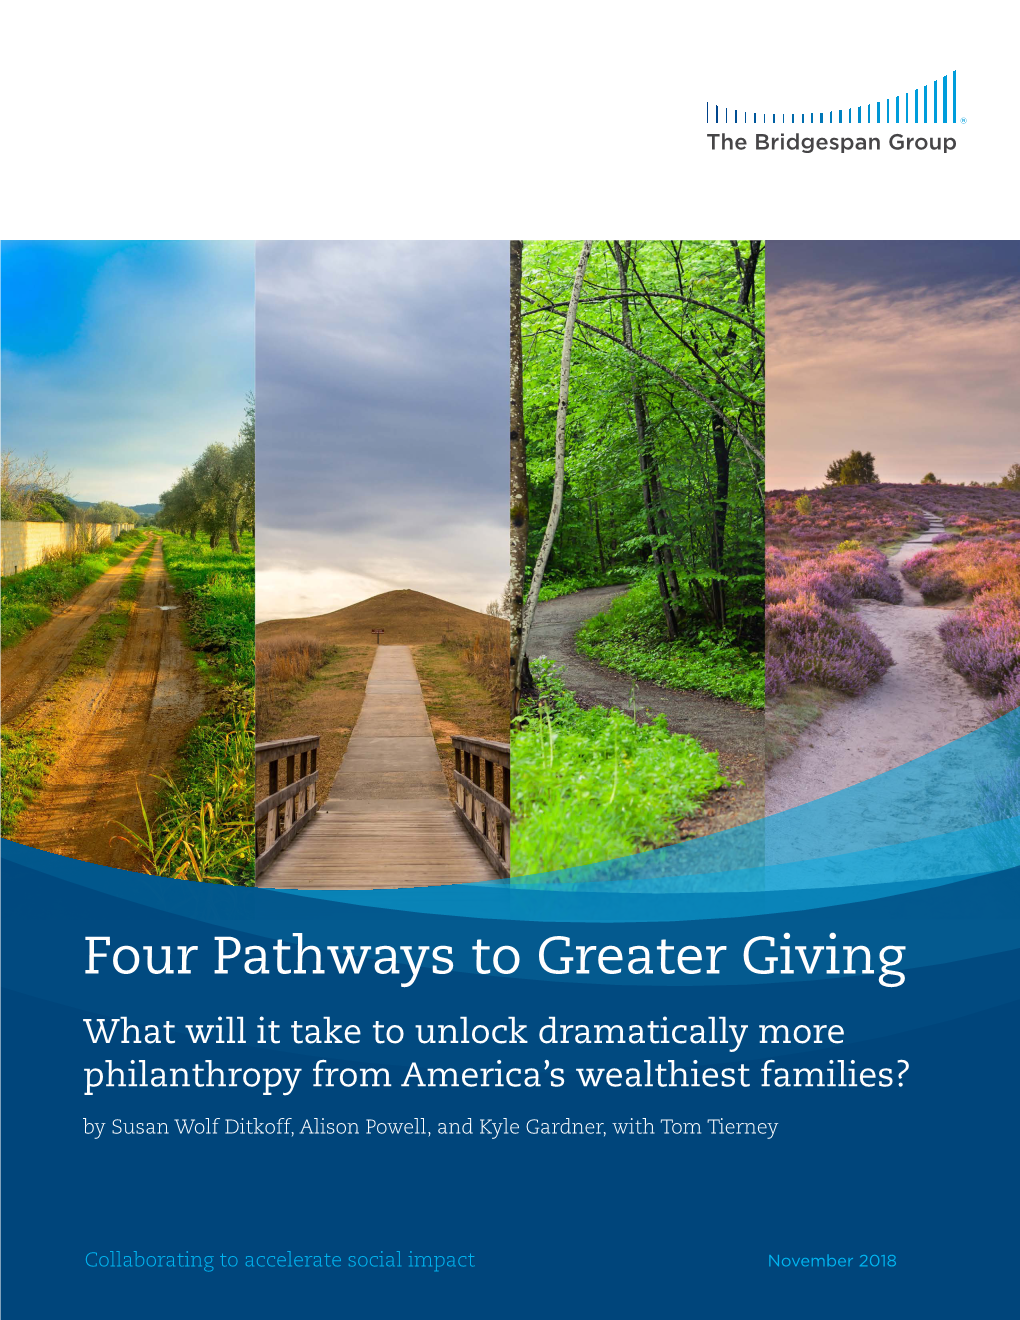 Four Pathways to Greater Giving